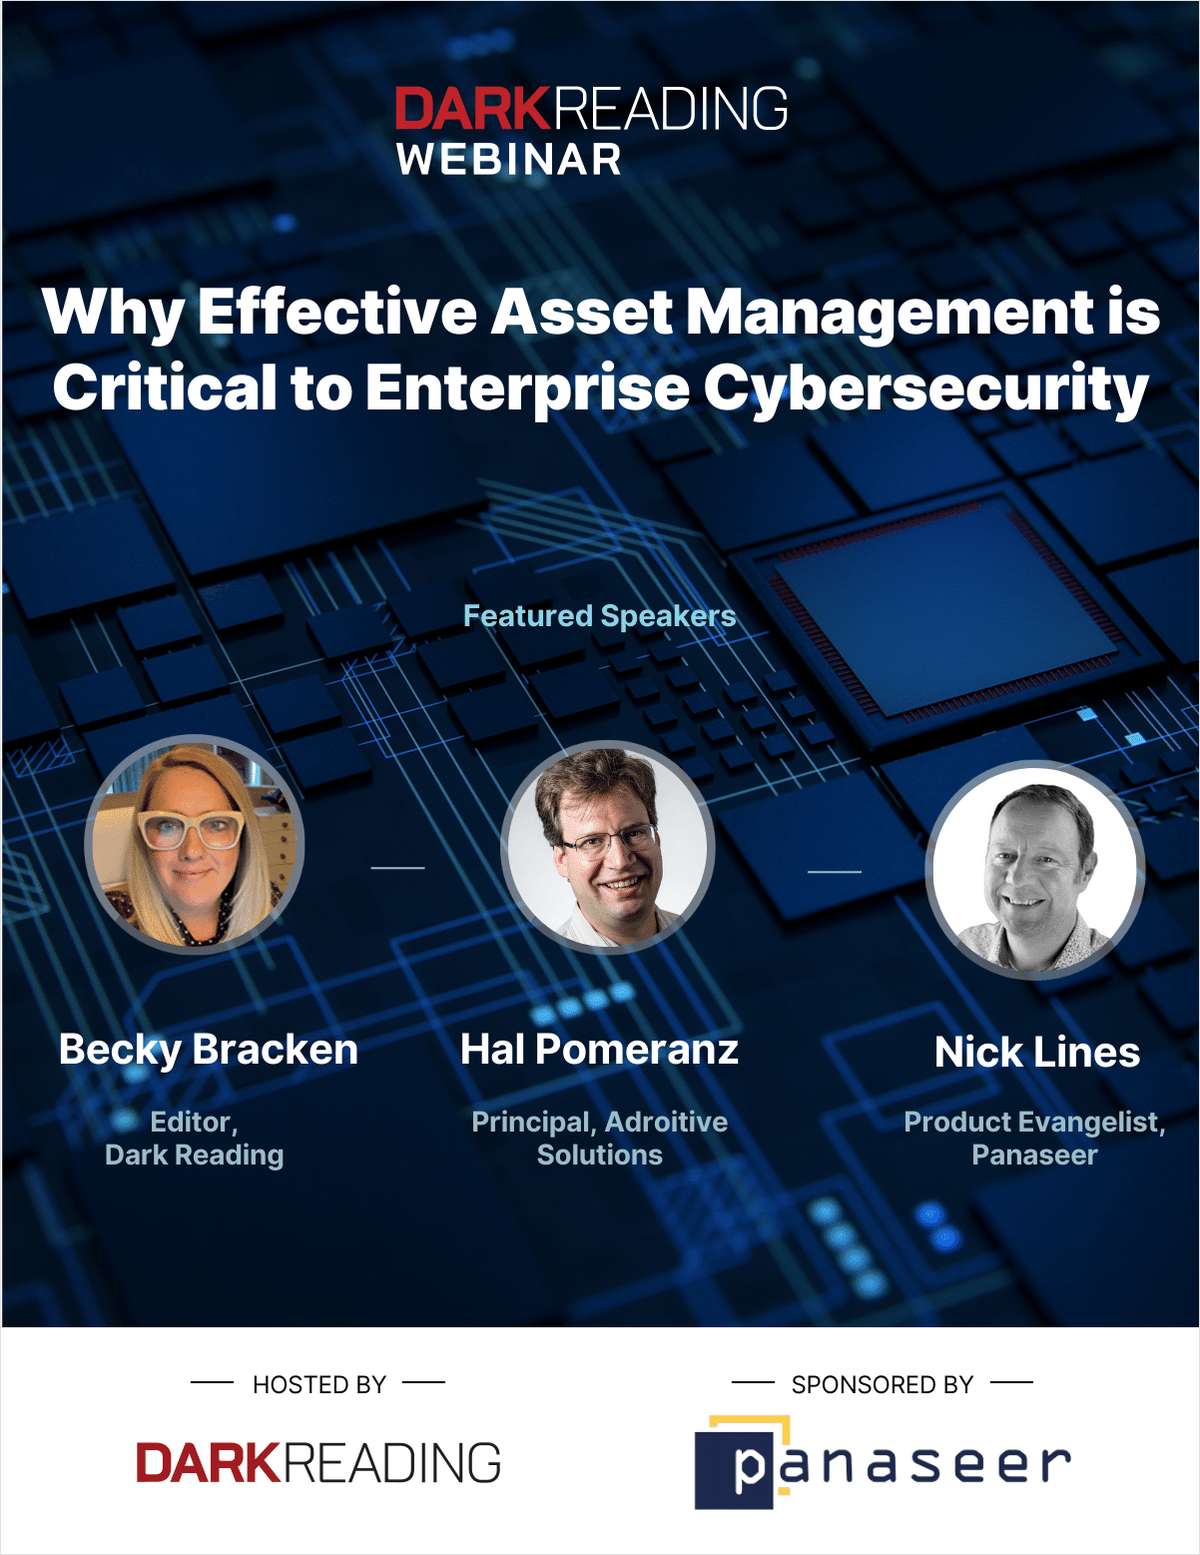 Why Effective Asset Management is Critical to Enterprise Cybersecurity